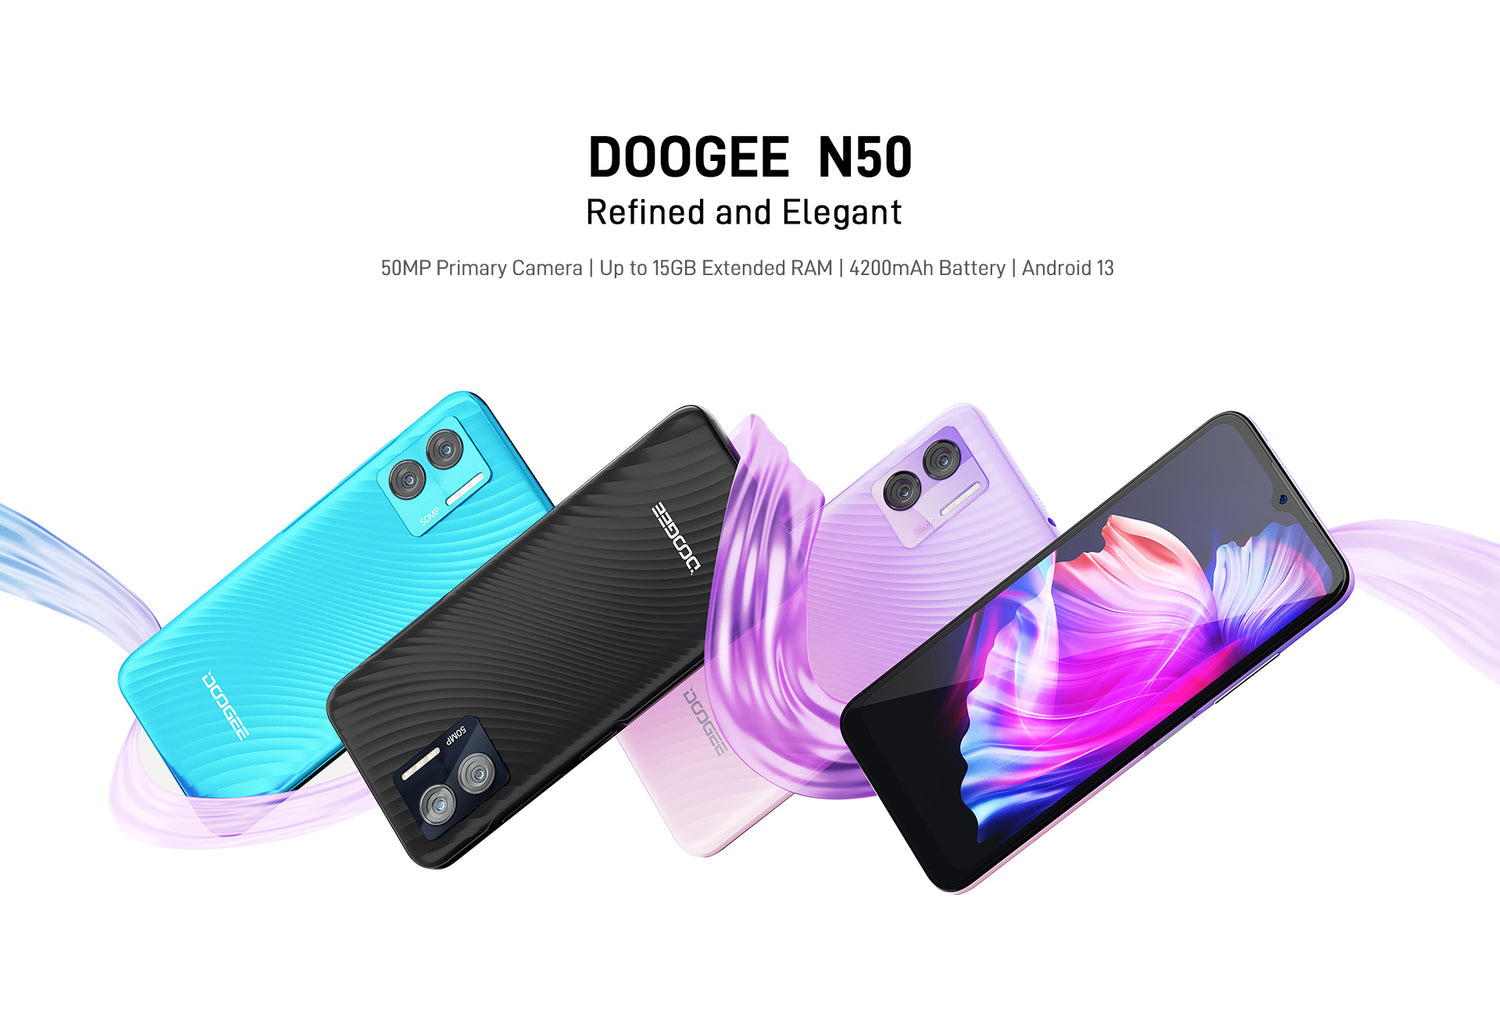 Doogee N50 Budget Smartphone With A Sleek Design, An Enormous Battery, And A Large Display